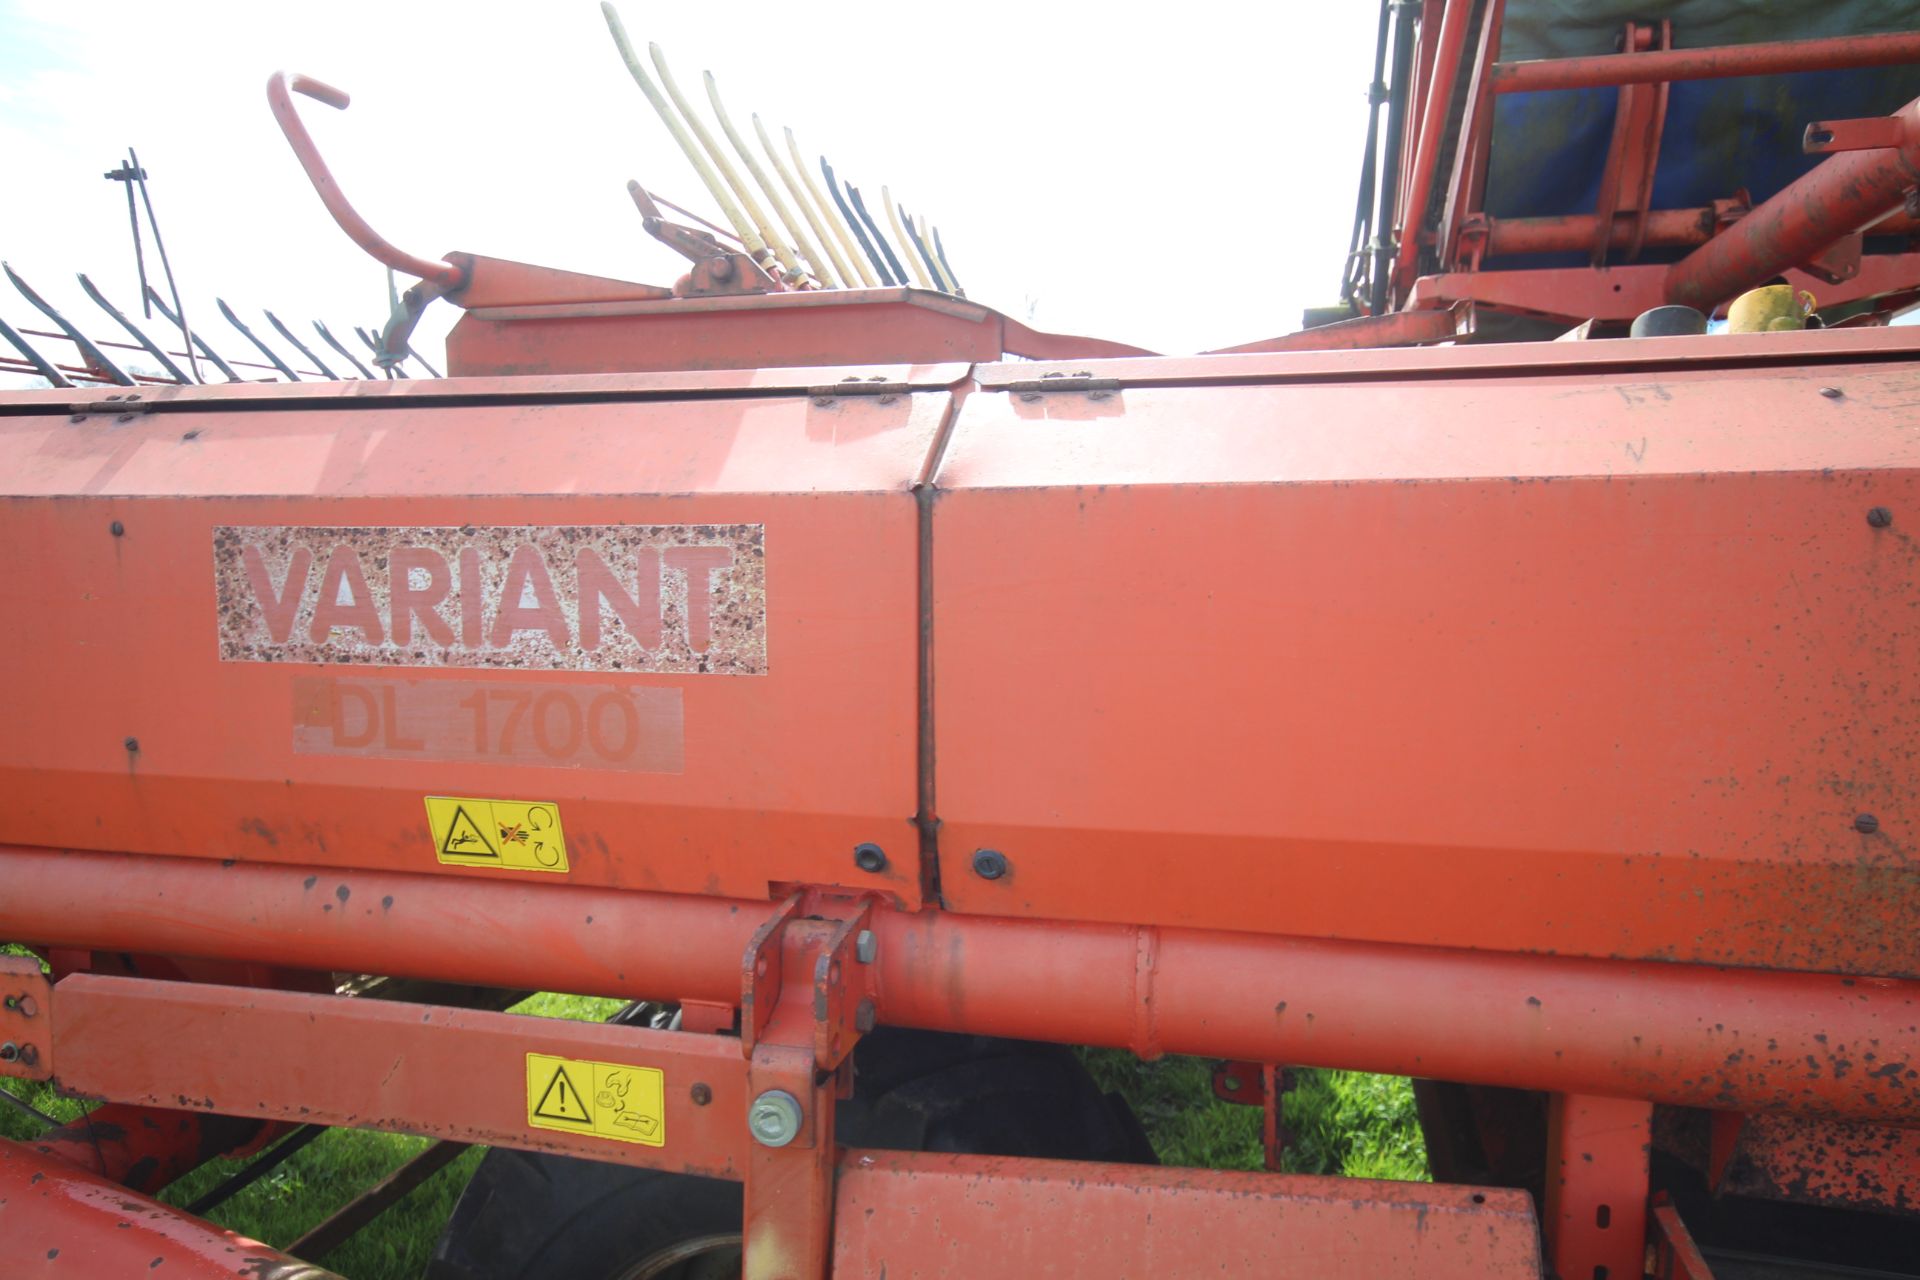 Grimme DL1700 Variant carrot/ onion harvester. With star cleaners. Control Box held. V - Image 33 of 61